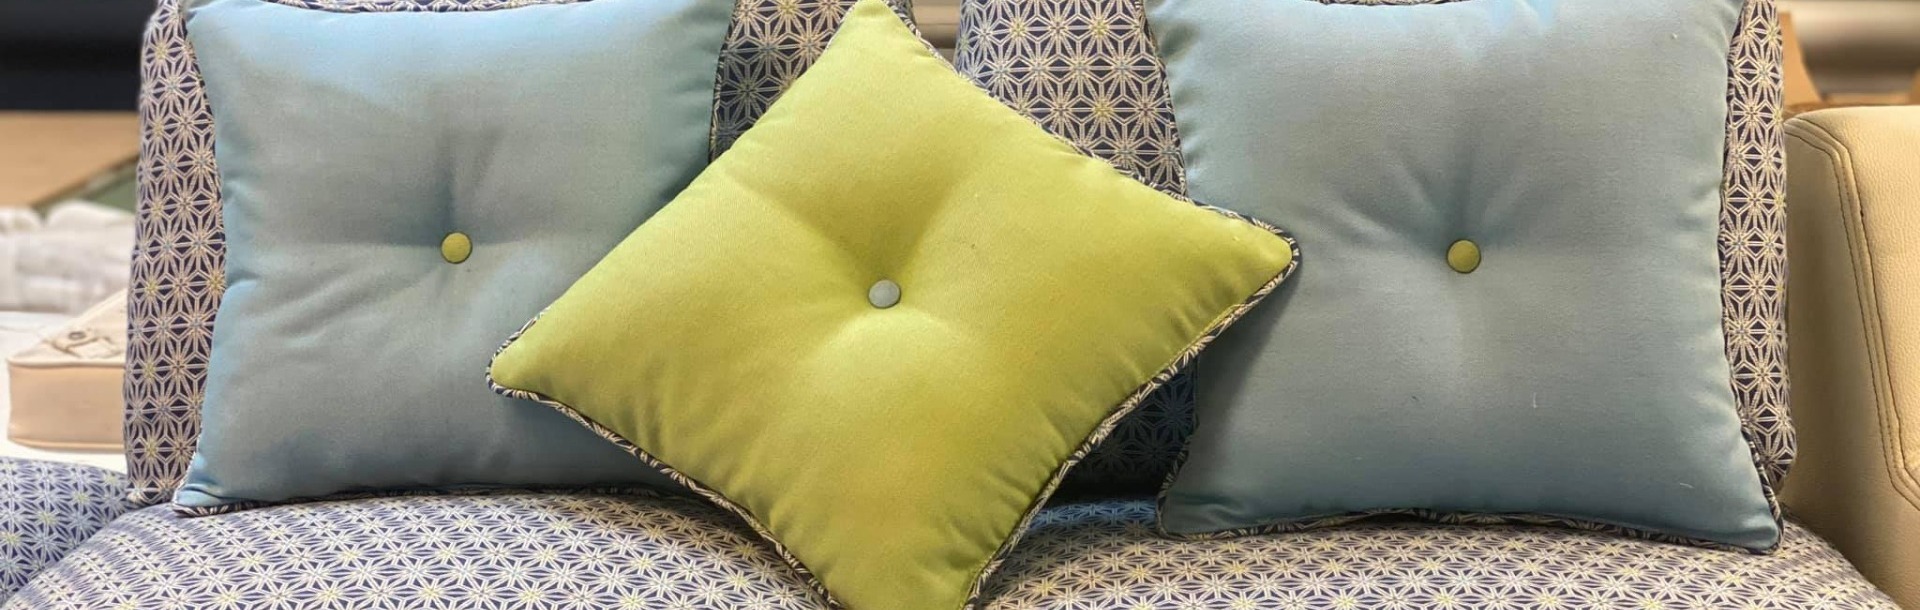 Upholstery makeover for your furniture Naples Canvas and Upholstery Florida